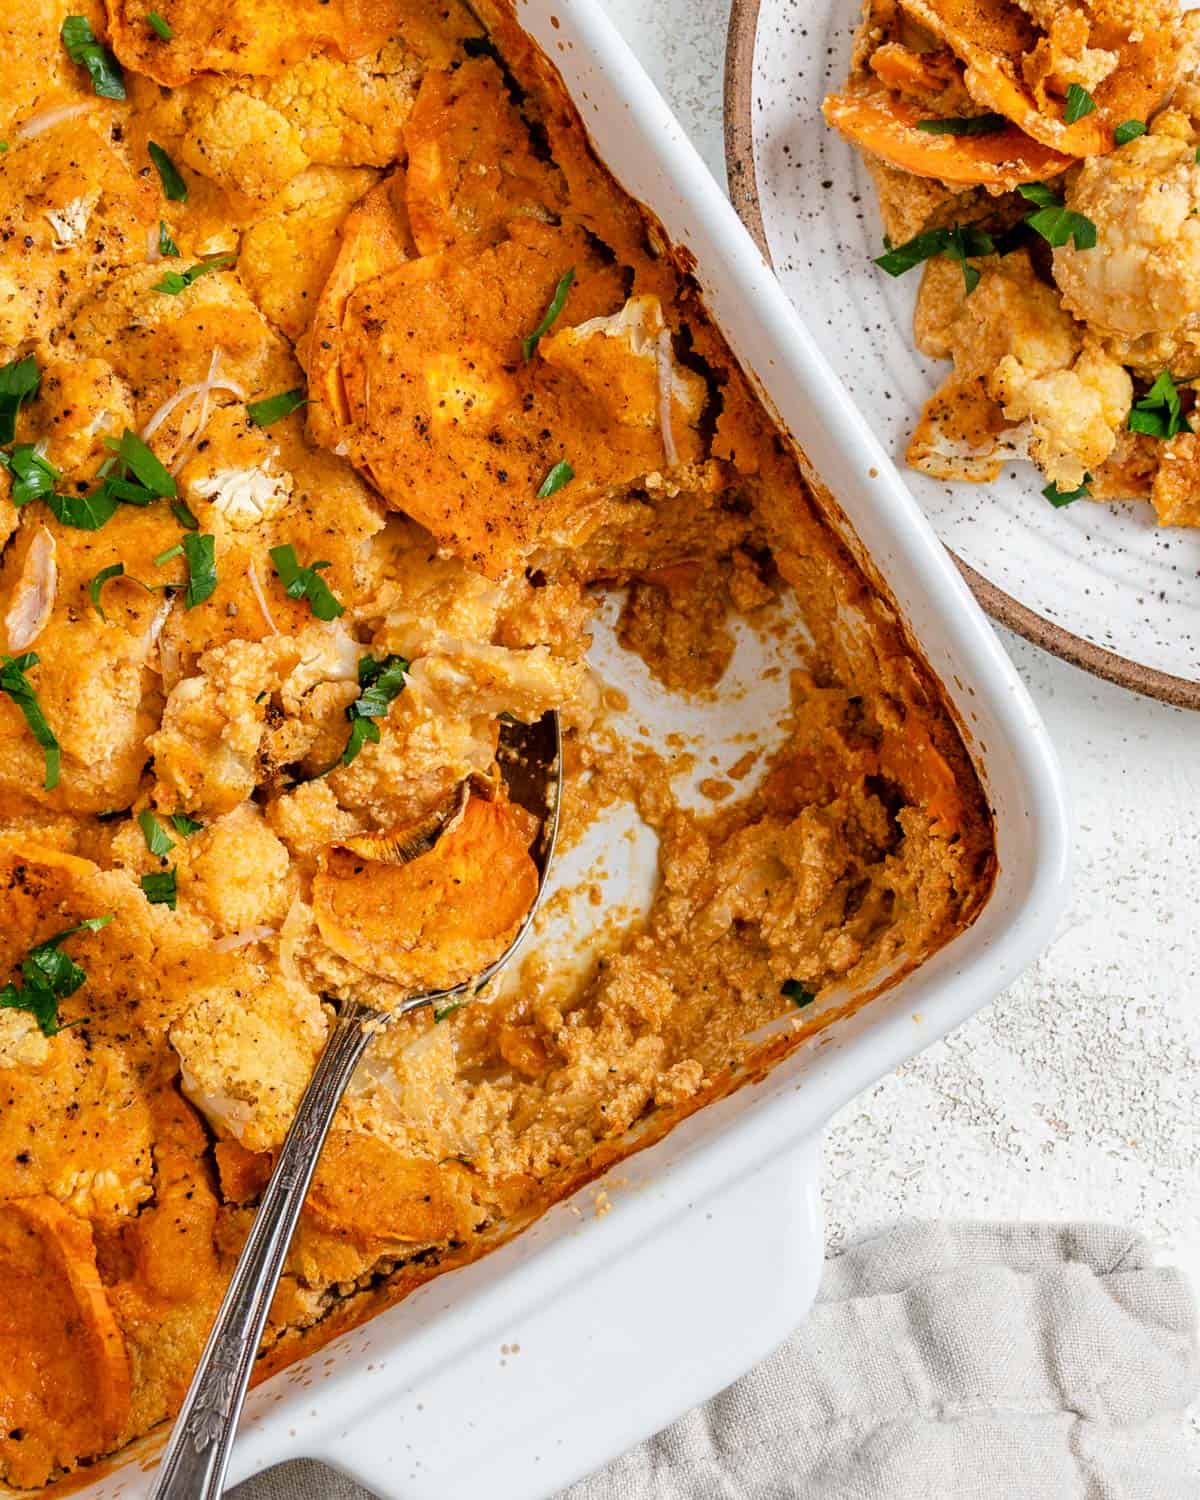 completed Healthy Vegan Cauliflower Casserole in a dish against a which background